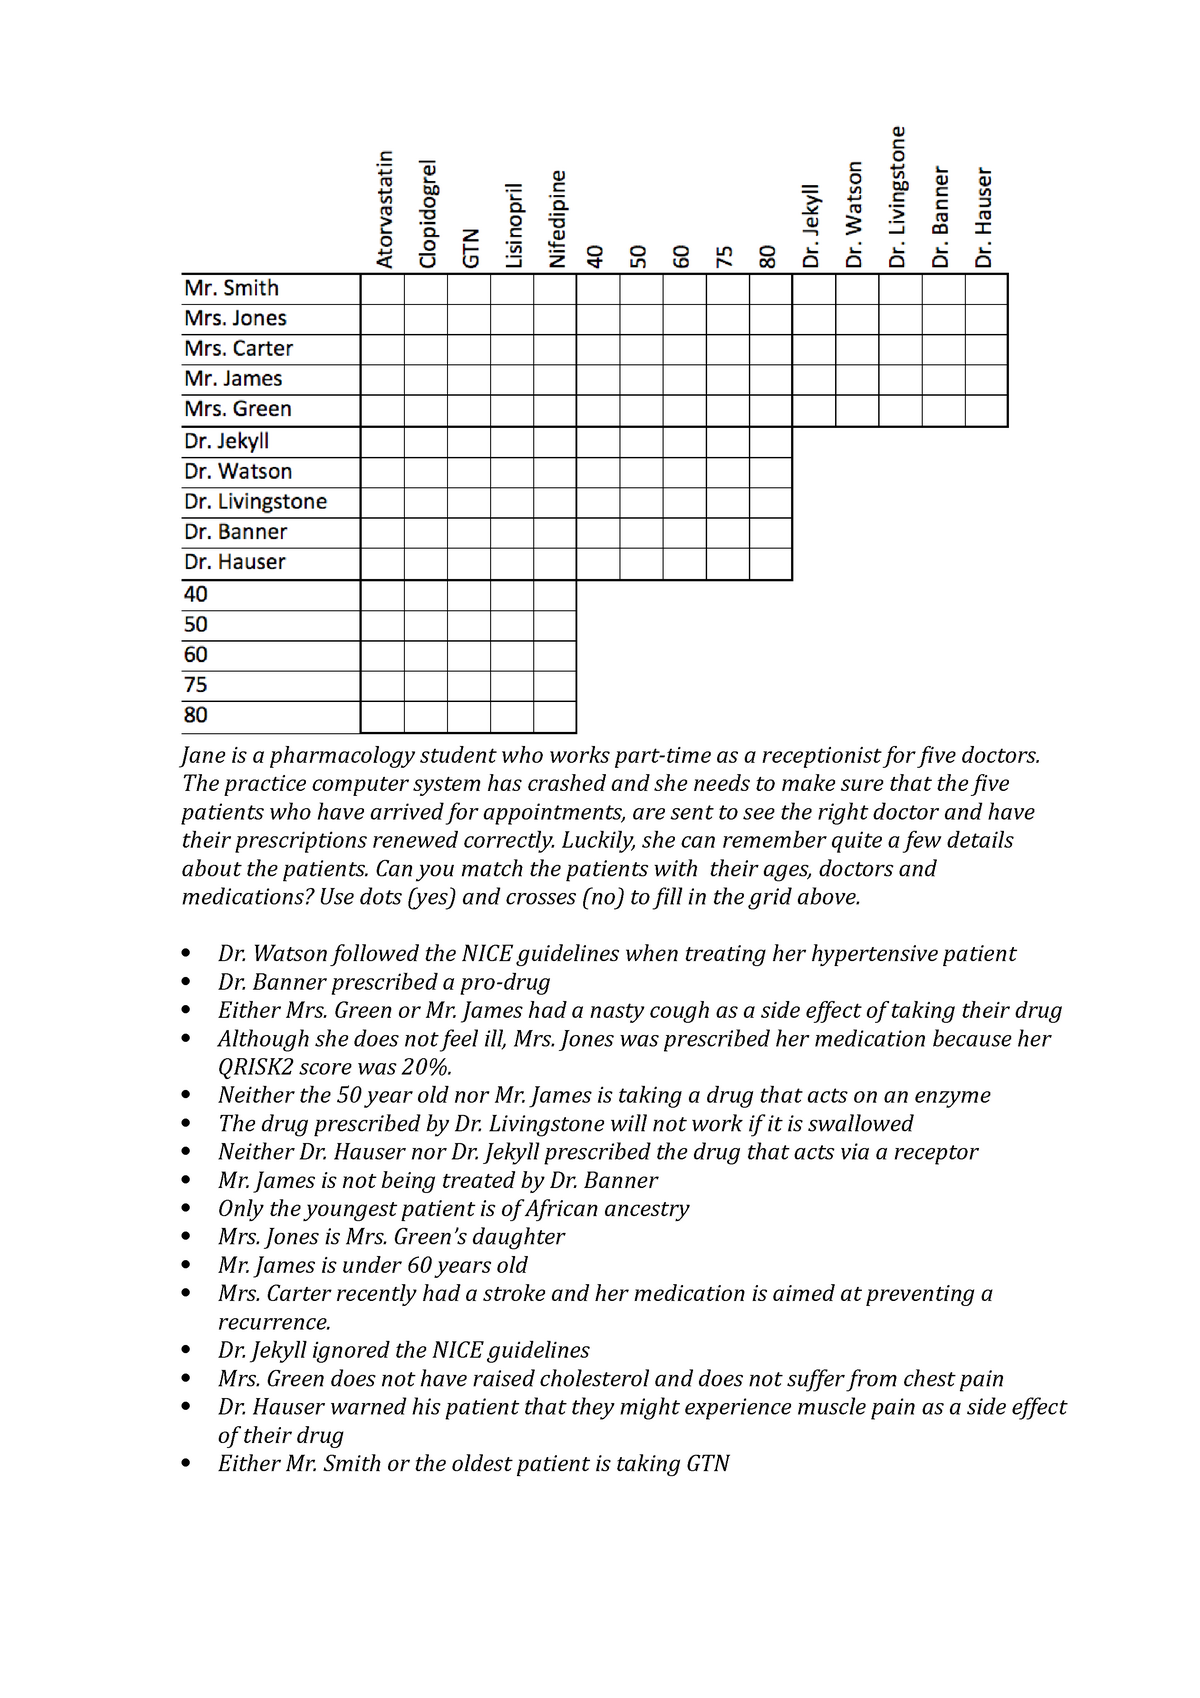 CV drug puzzle clues and grid - Jane is a pharmacology student who ...